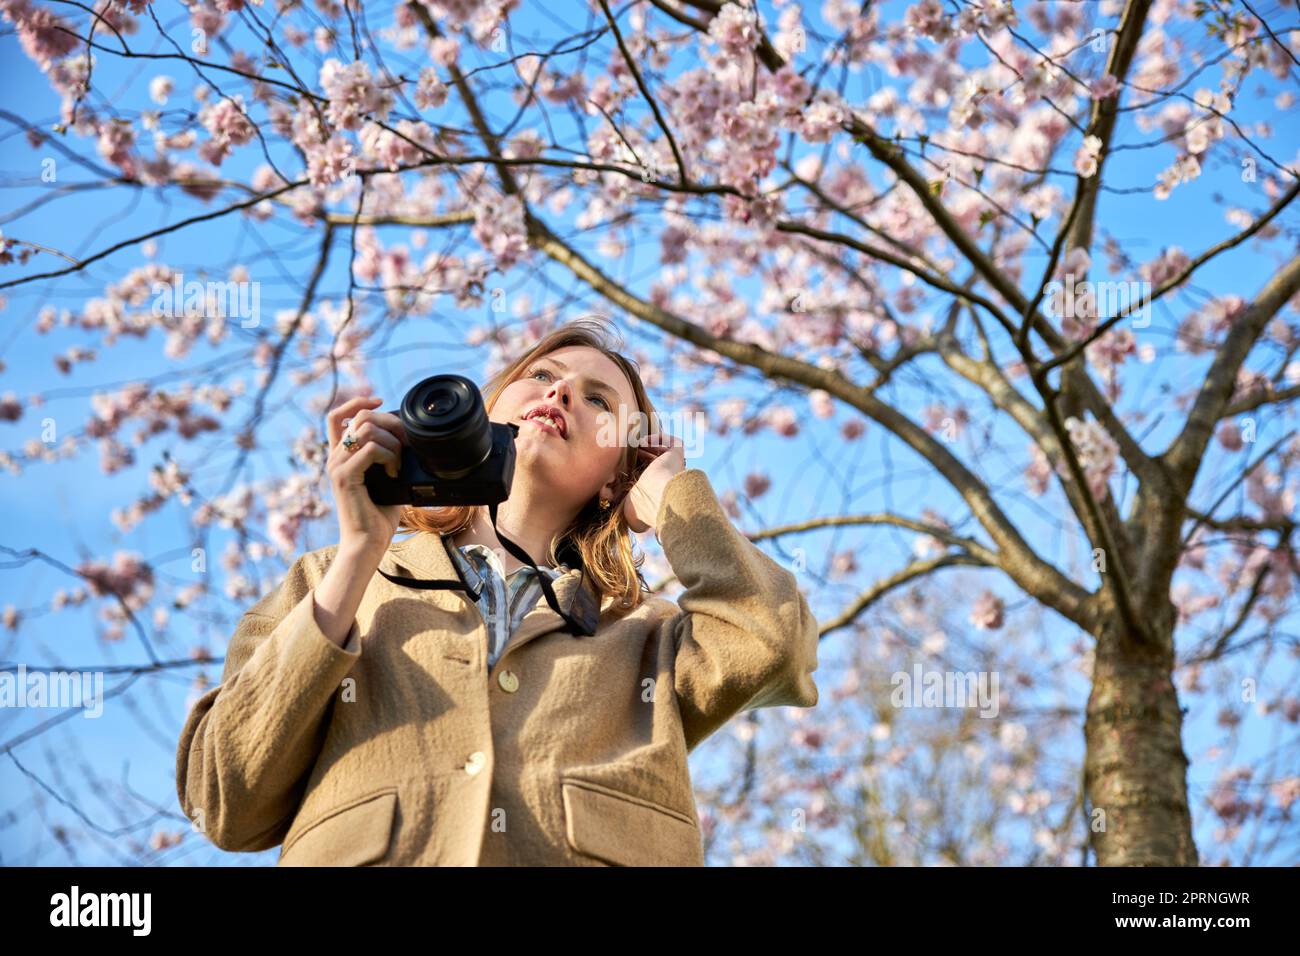 redhead girl taking photos in front of cherry blossom Stock Photo